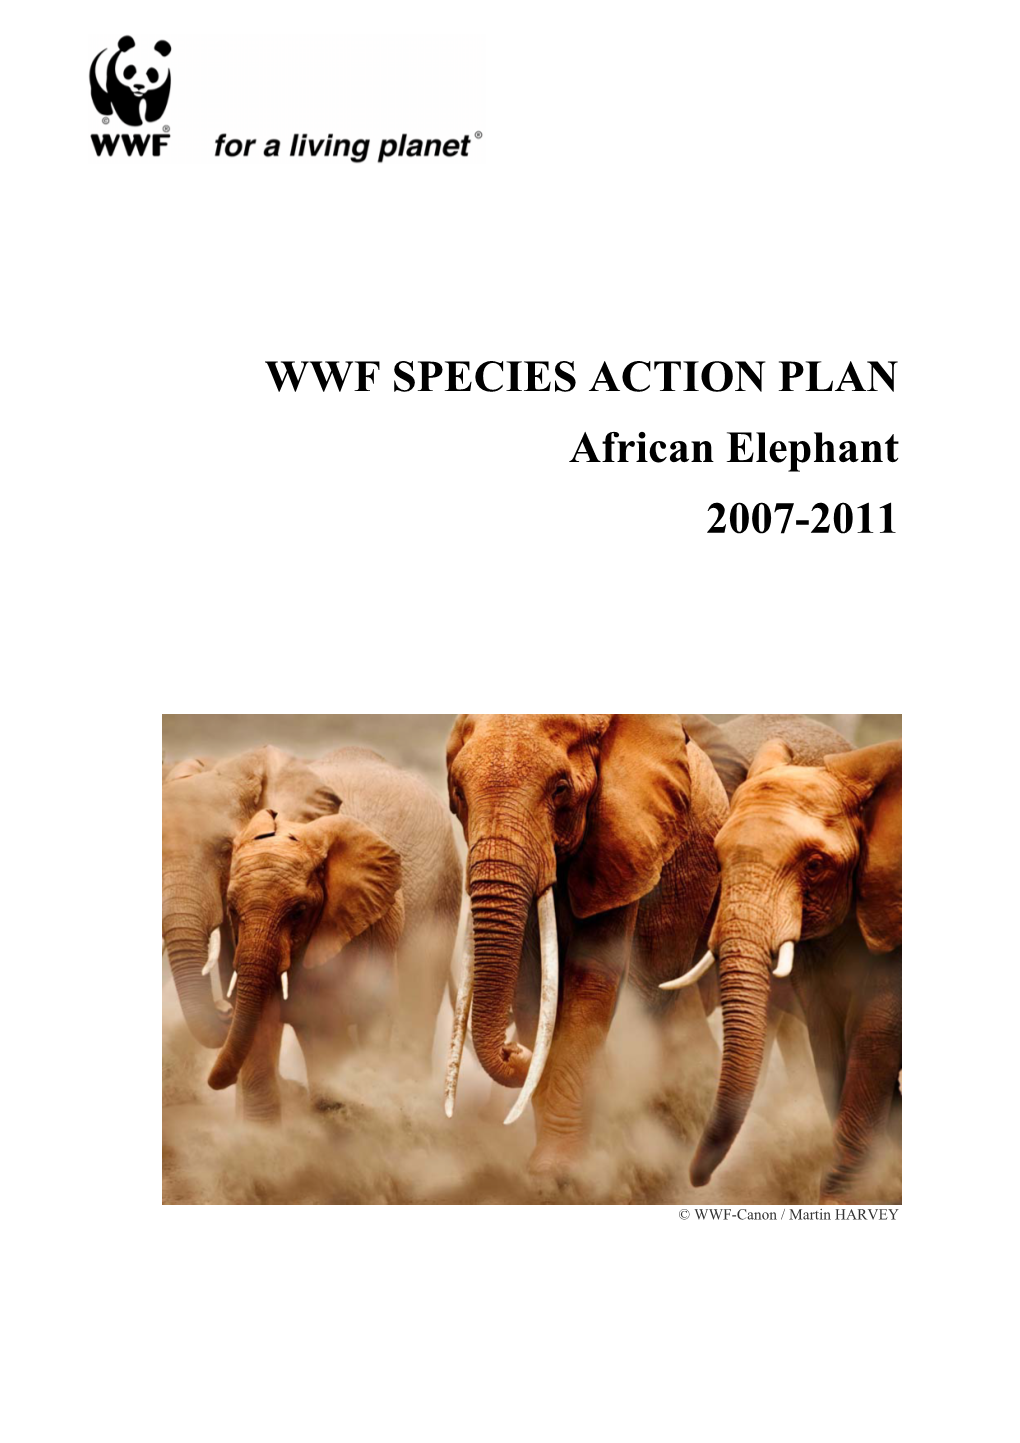 WWF African Elephant Conservation Fund (E.G